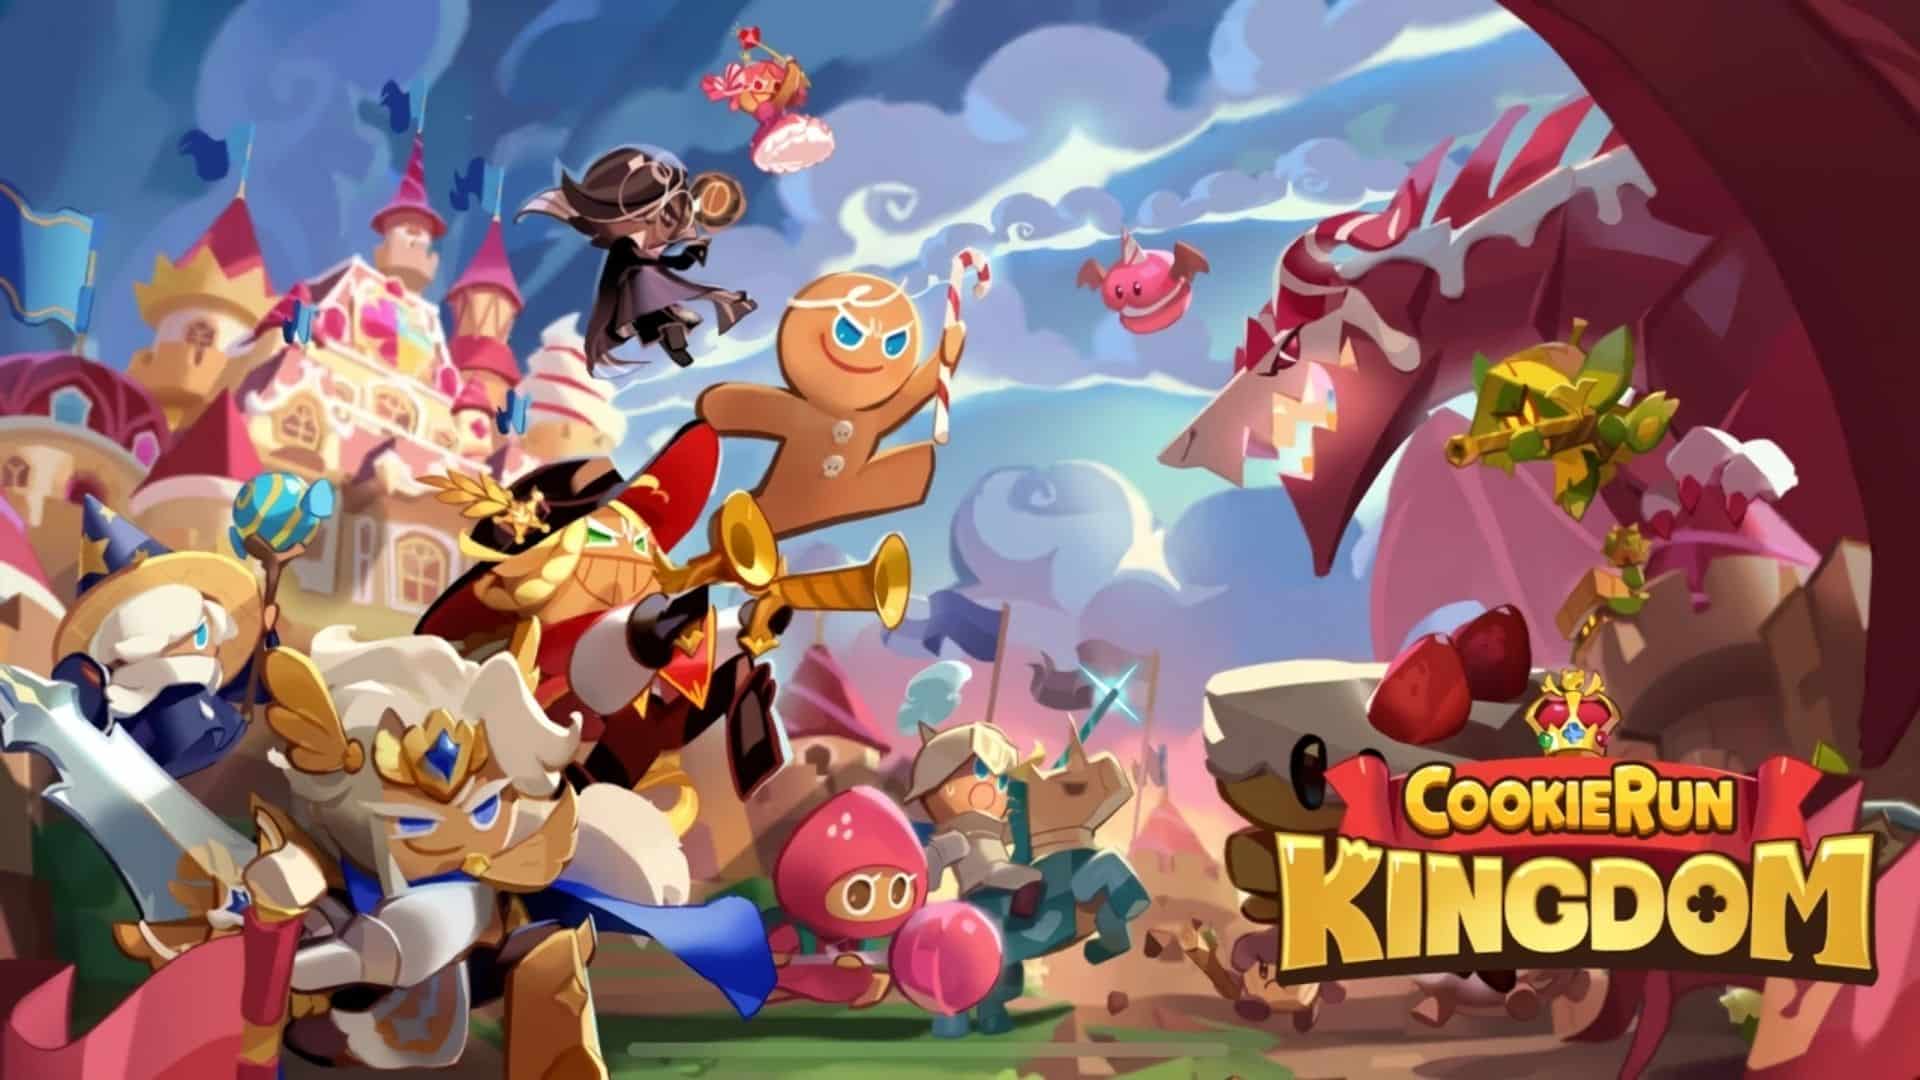 An image of characters from Cookie Run: Kingdom with the logo